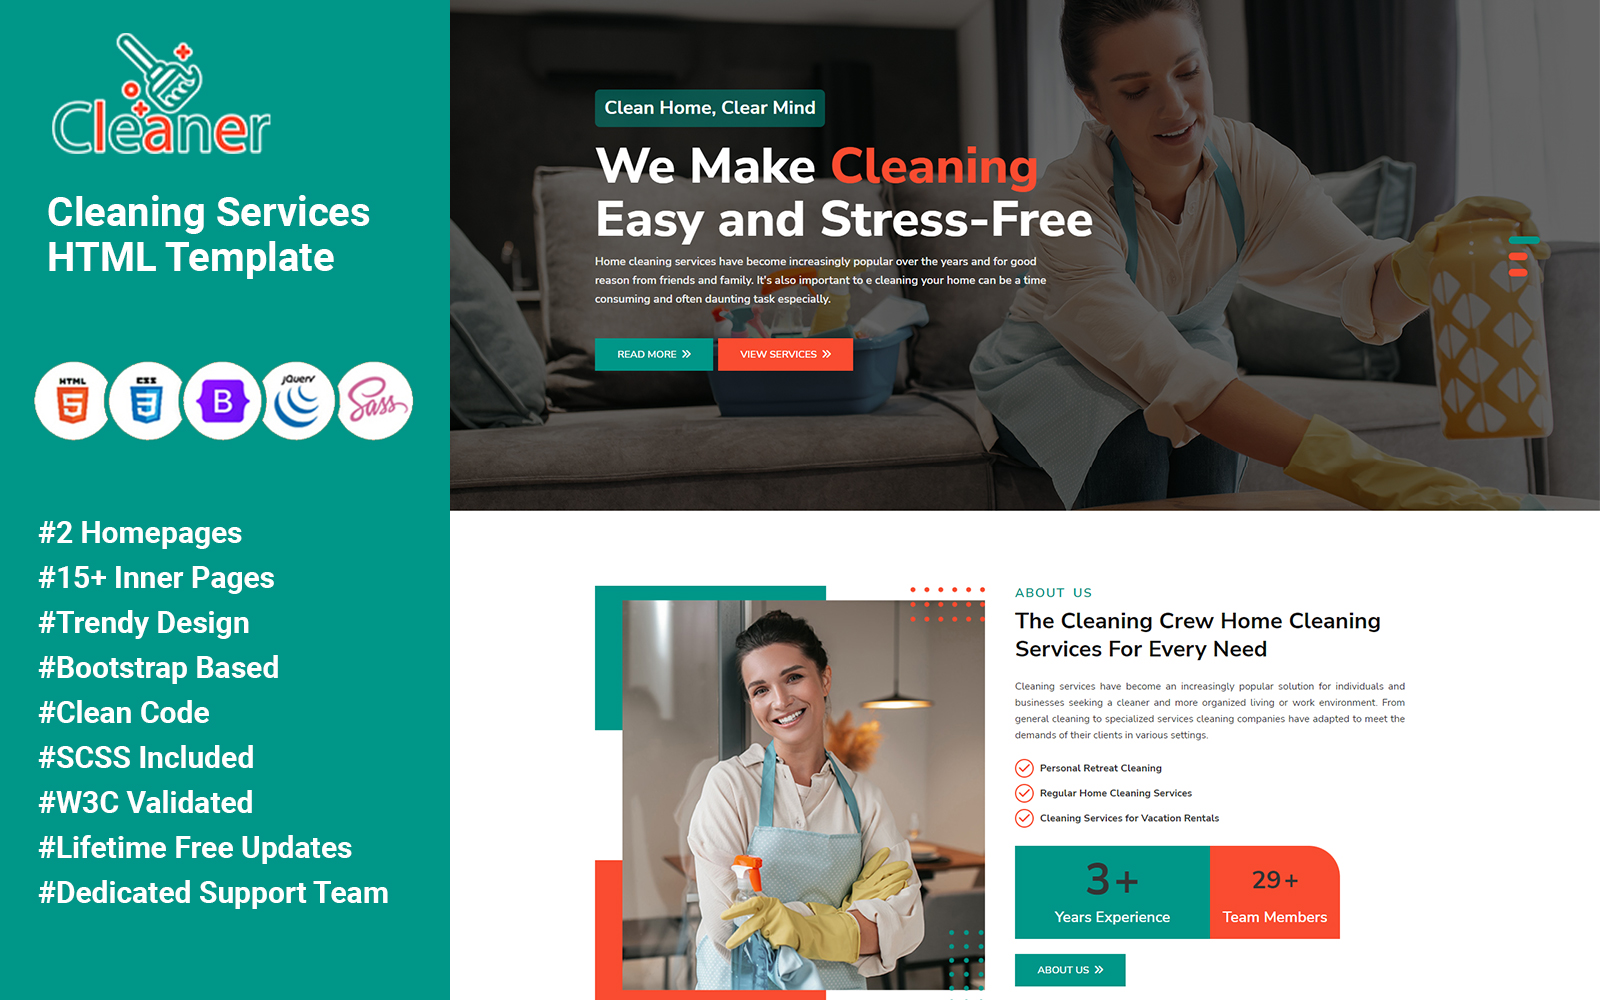 Cleaner - Cleaning Services HTML Template